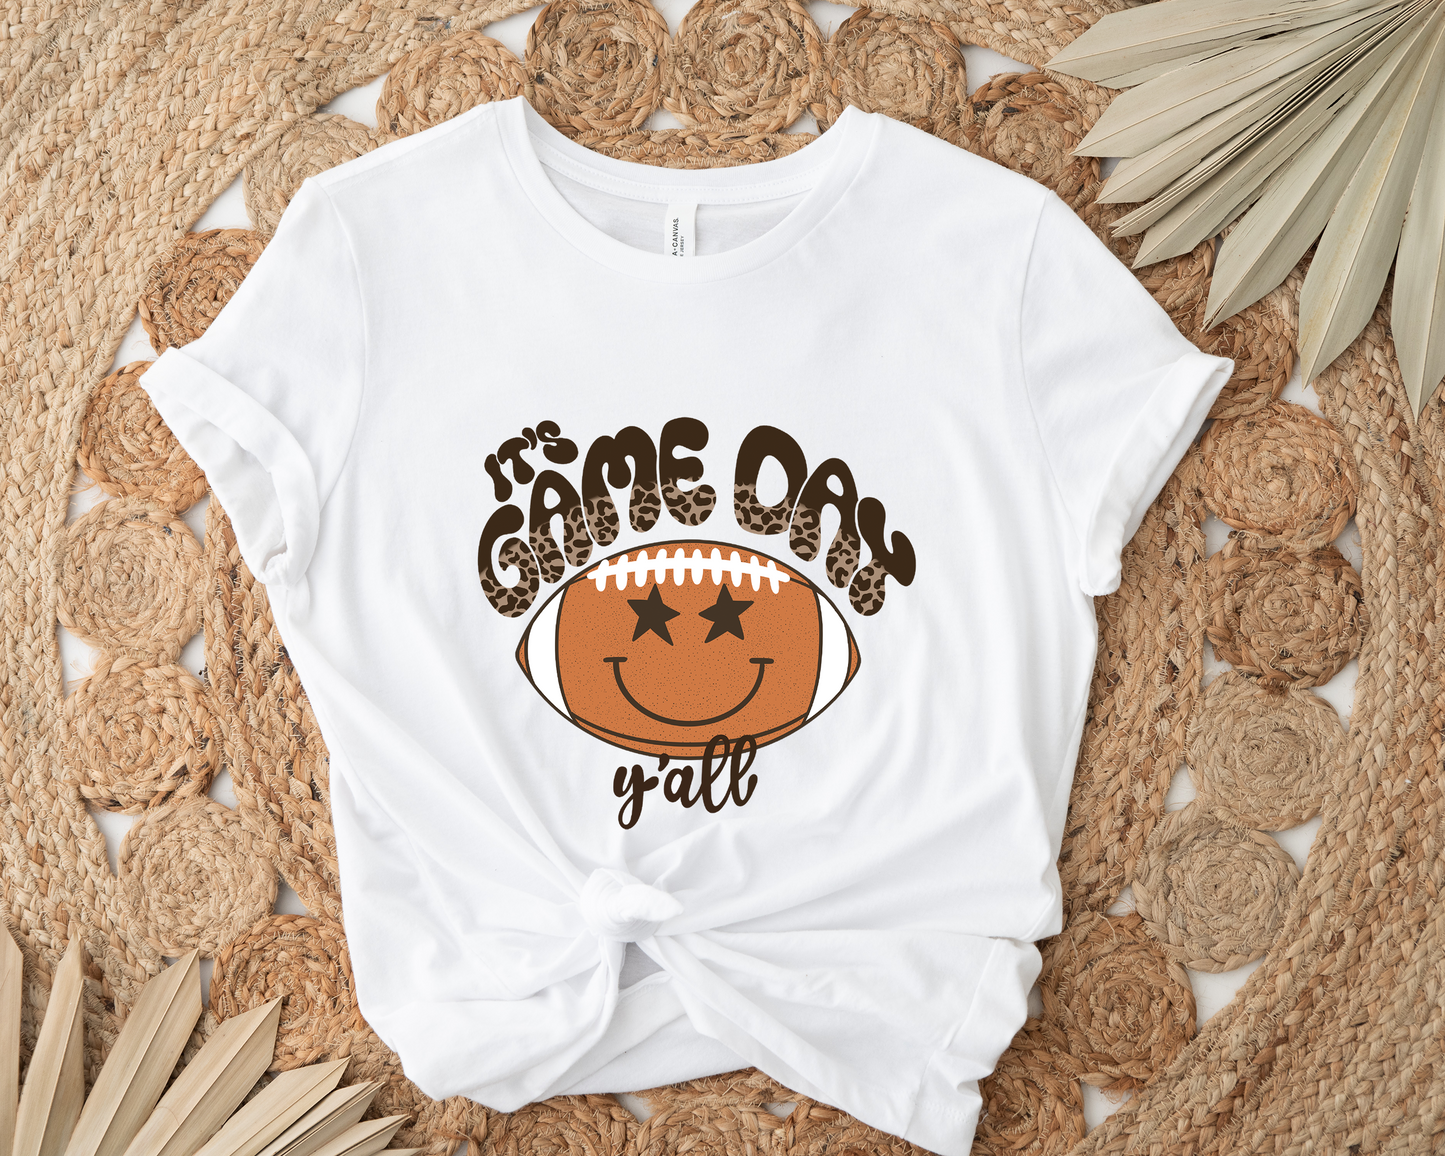 It's Game Day White Graphic Tee